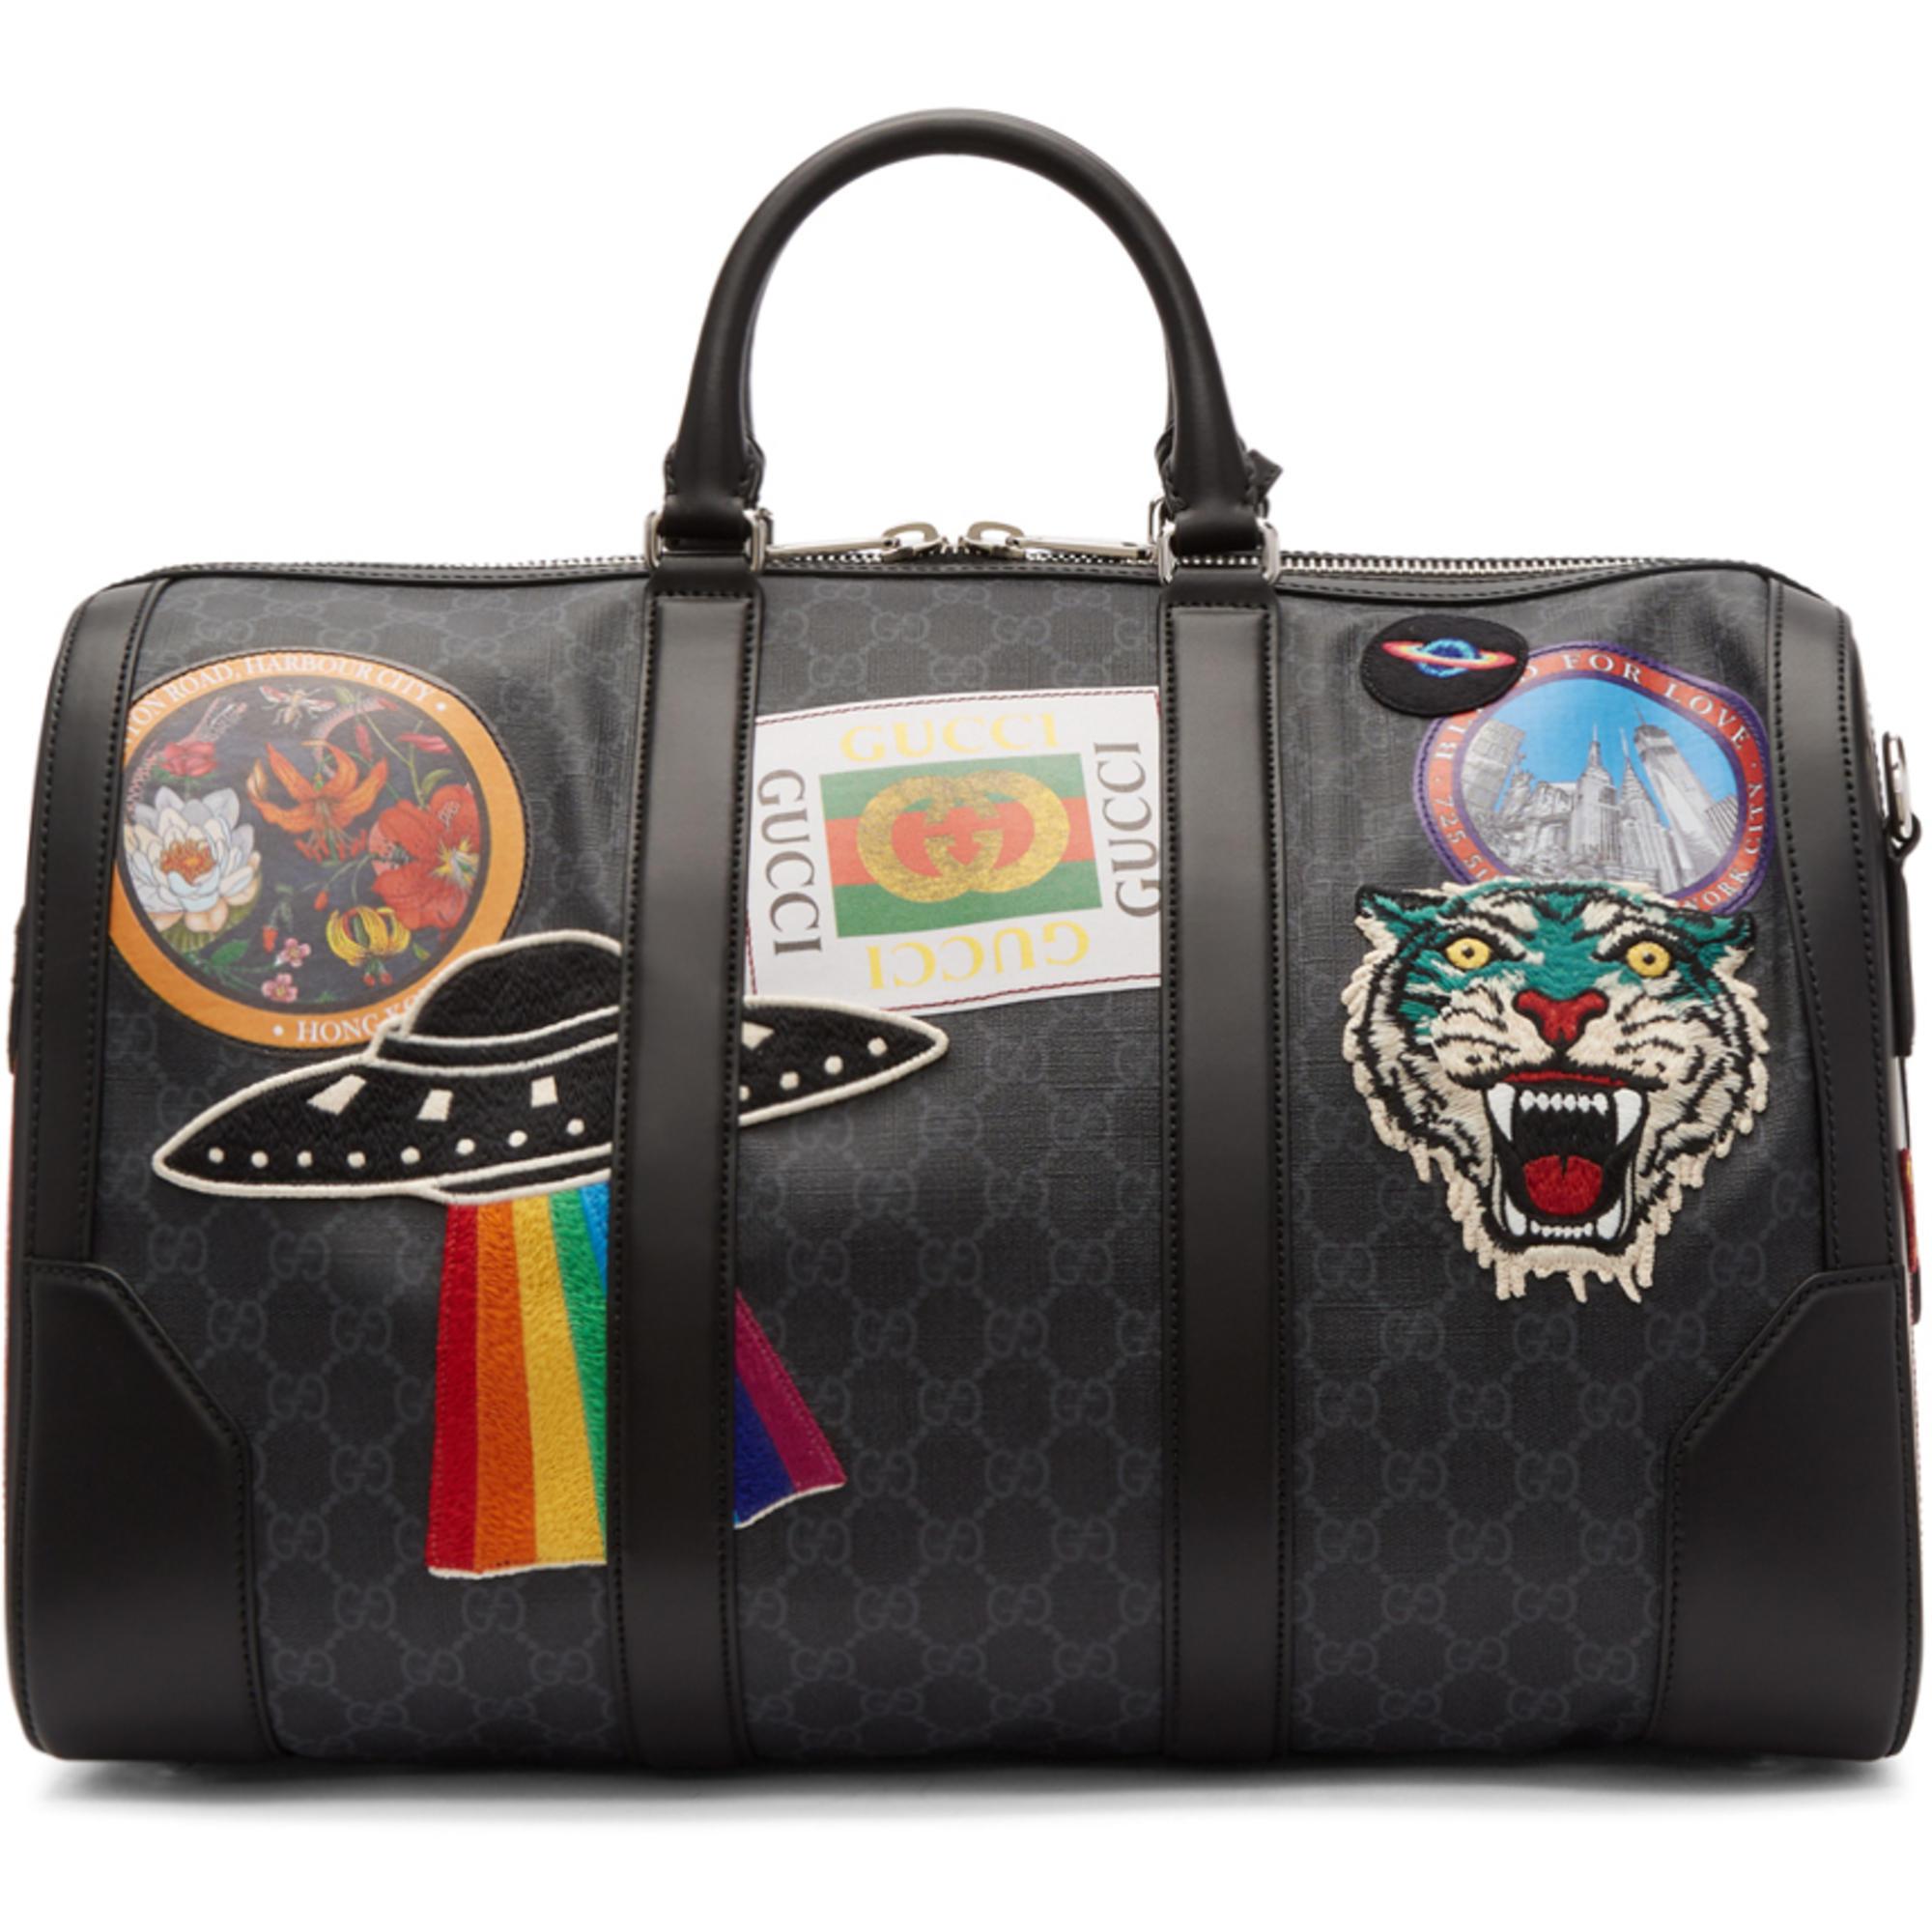 Gucci Canvas Black Gg Supreme Patches Duffle Bag | Lyst